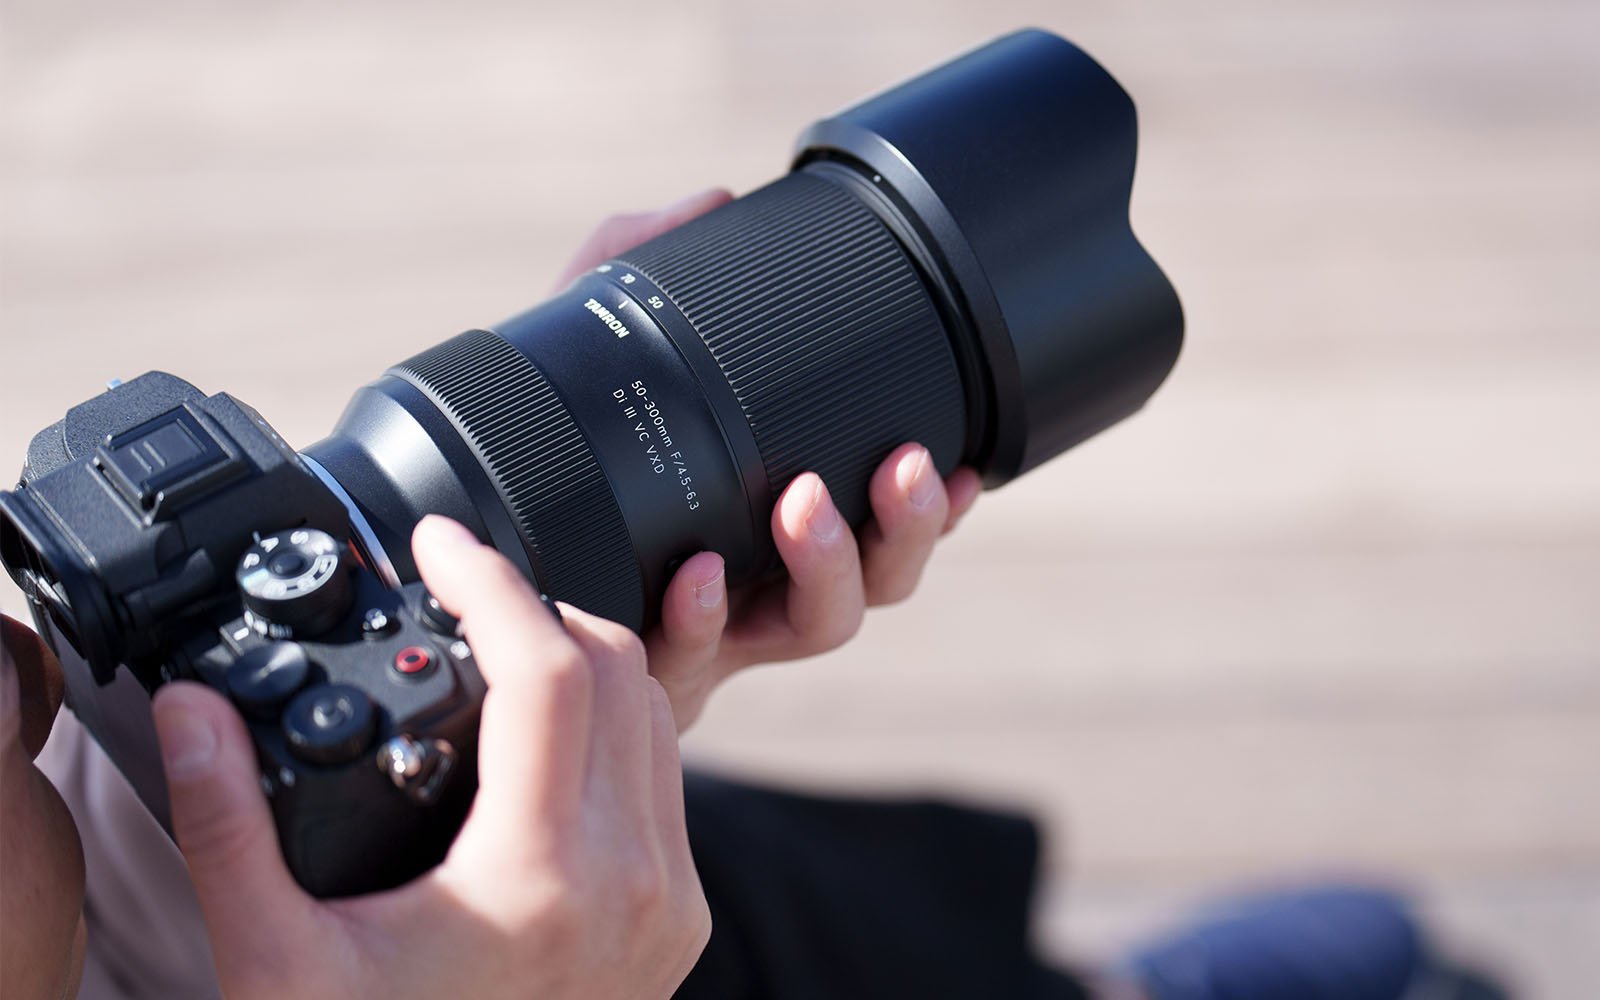 A person holding a professional DSLR camera with a large telephoto lens, adjusting the focus ring. The camera has various dials and buttons visible, and the background is blurred, suggesting an outdoor setting.